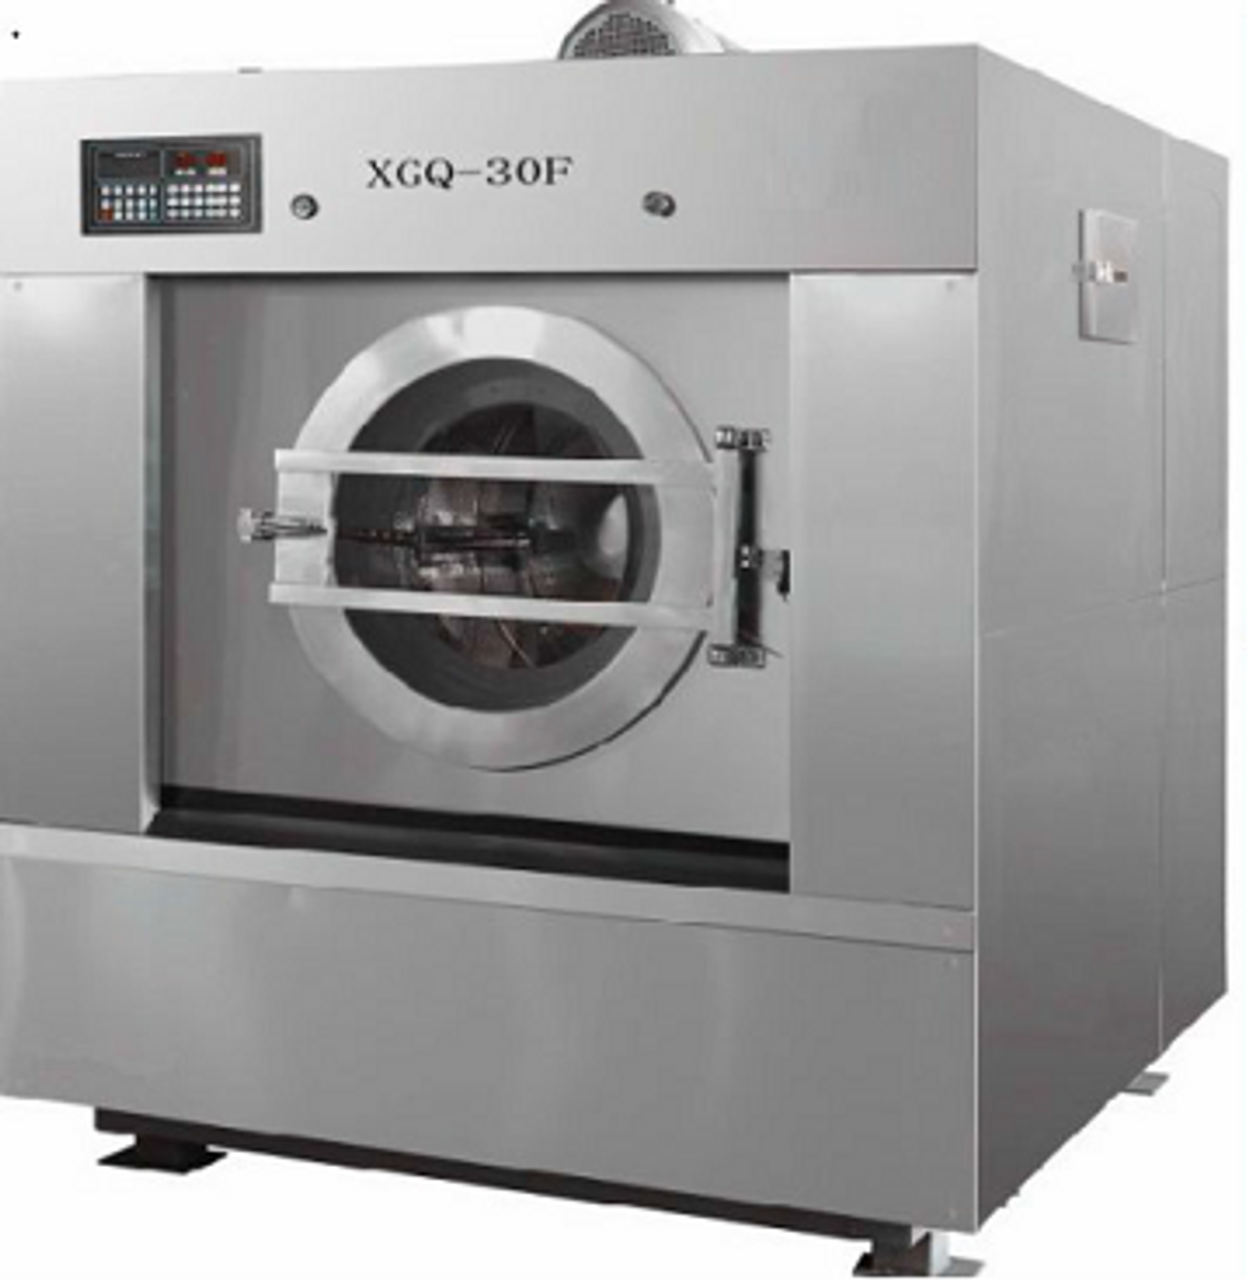 Buy Xgq Automatic Washing Machine Washer Extractor From Gz Industrial Supplies